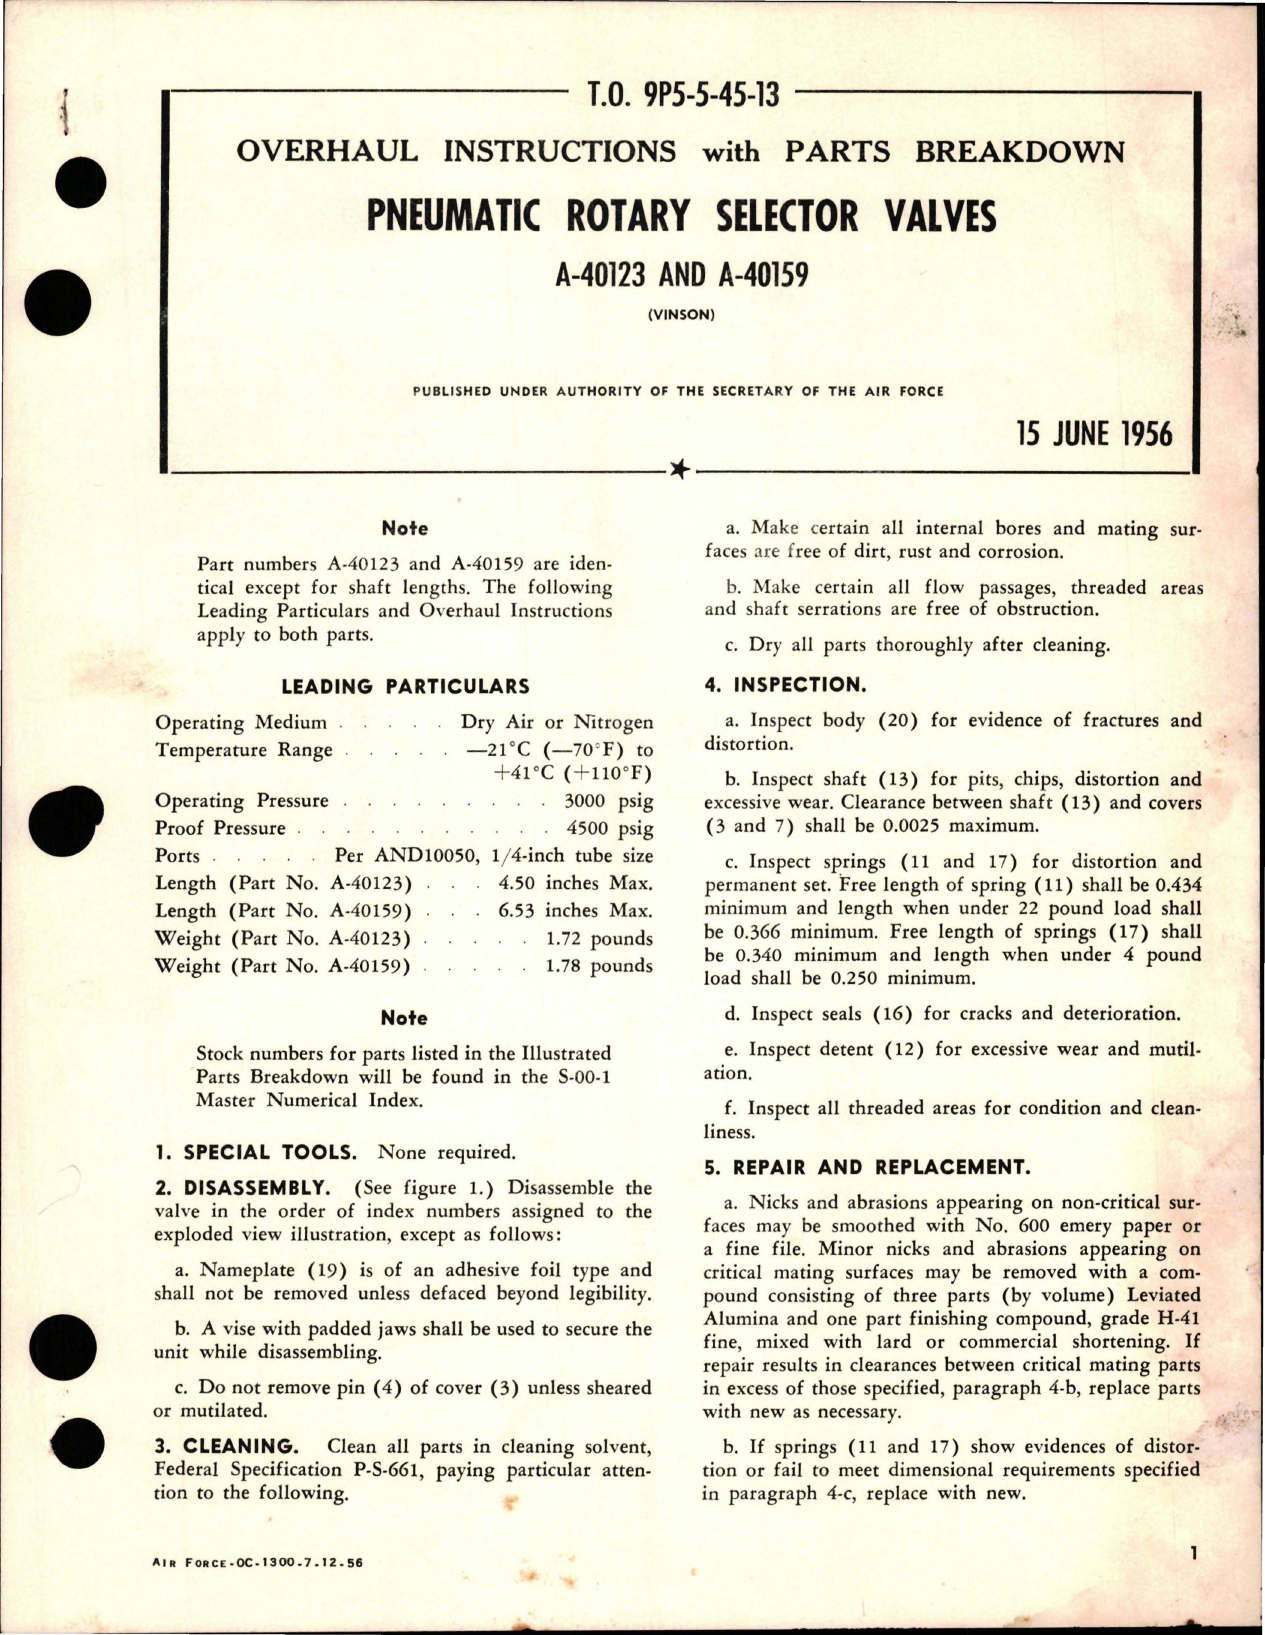 Sample page 1 from AirCorps Library document: Overhaul Instructions with Parts Breakdown for Pneumatic Rotary Selector Valves - A-40123 and A-40159